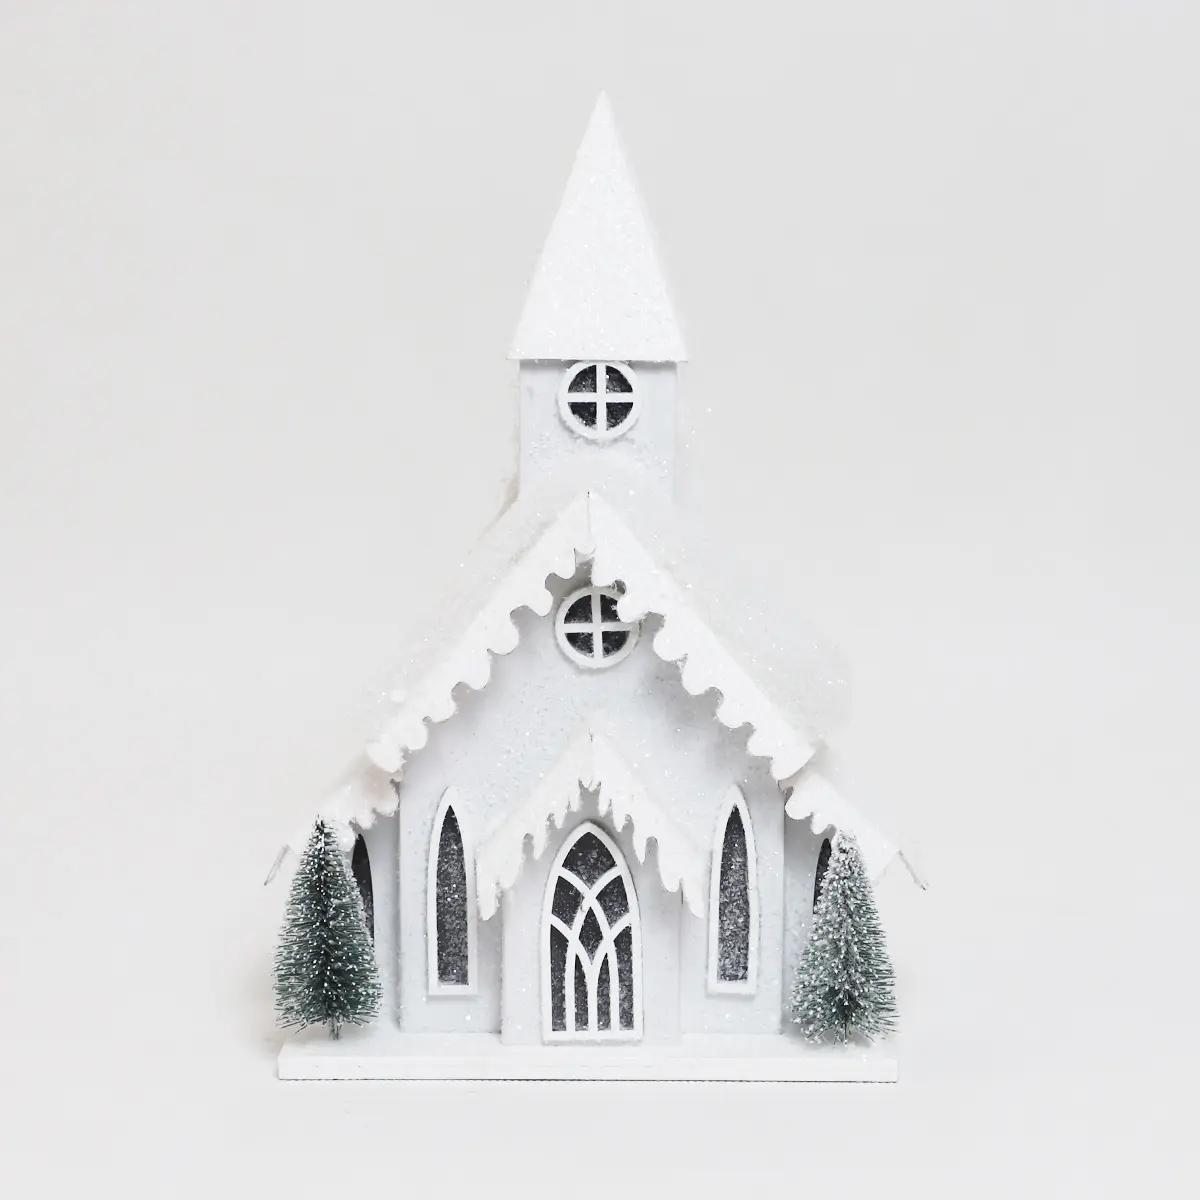 New Year Presents Ornaments 9.45" Inch Handmade Paper Board LED Lighted Winter Snow Christmas Village Houses With Snowman